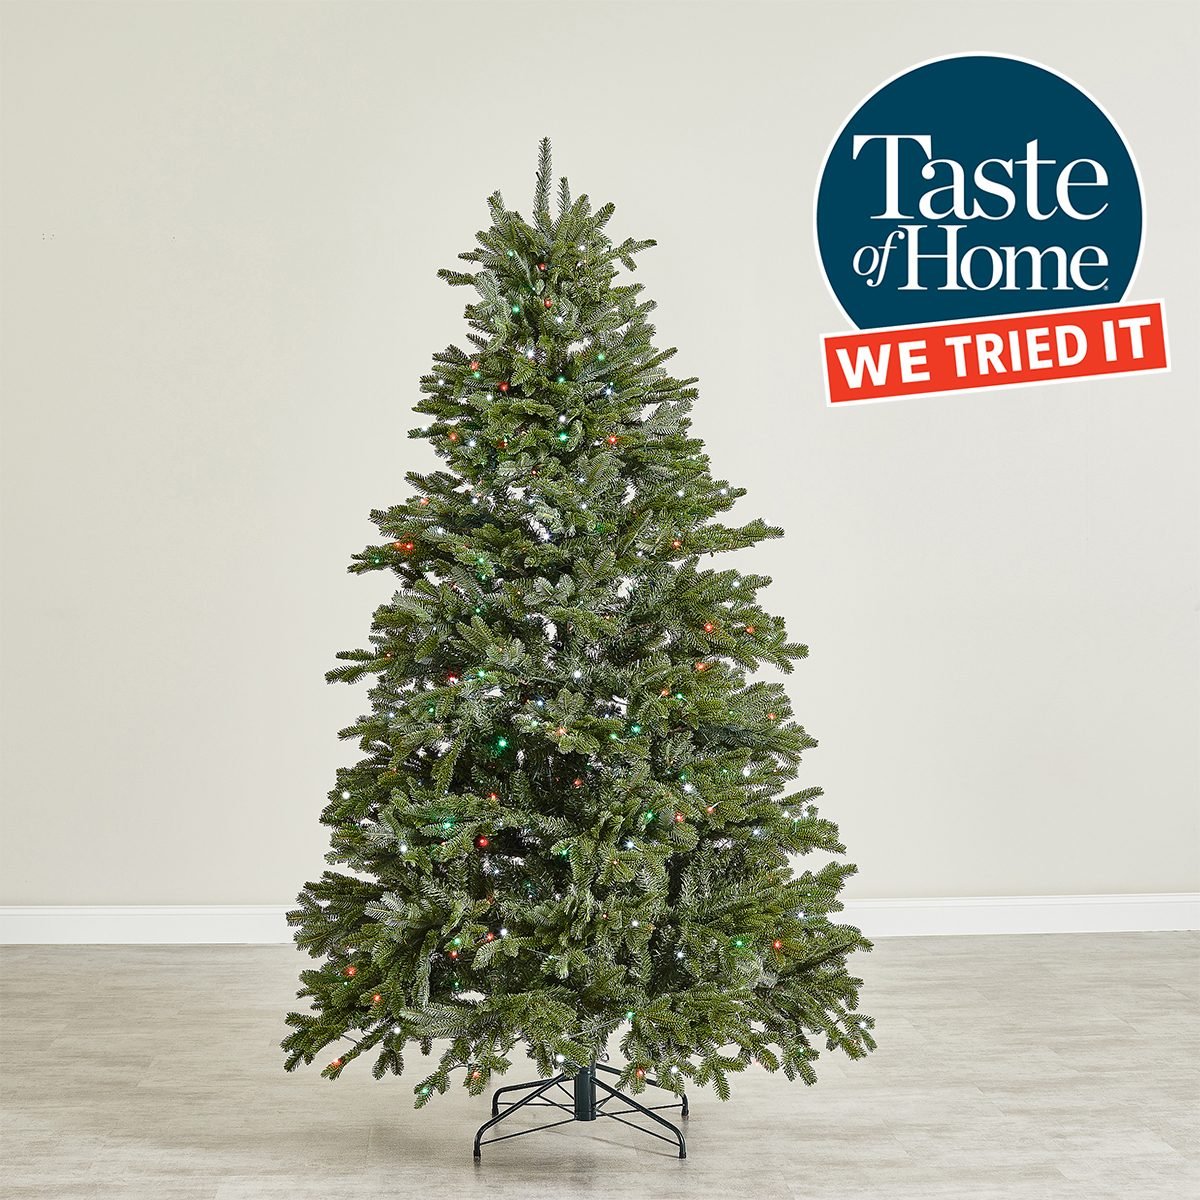 https://www.tasteofhome.com/wp-content/uploads/2023/11/TOH-We-Tried-TOHAxFHMA23_ArtificialXMasTrees_KS_10_11_004-smart-twinkly-tree.jpg?fit=700%2C1024